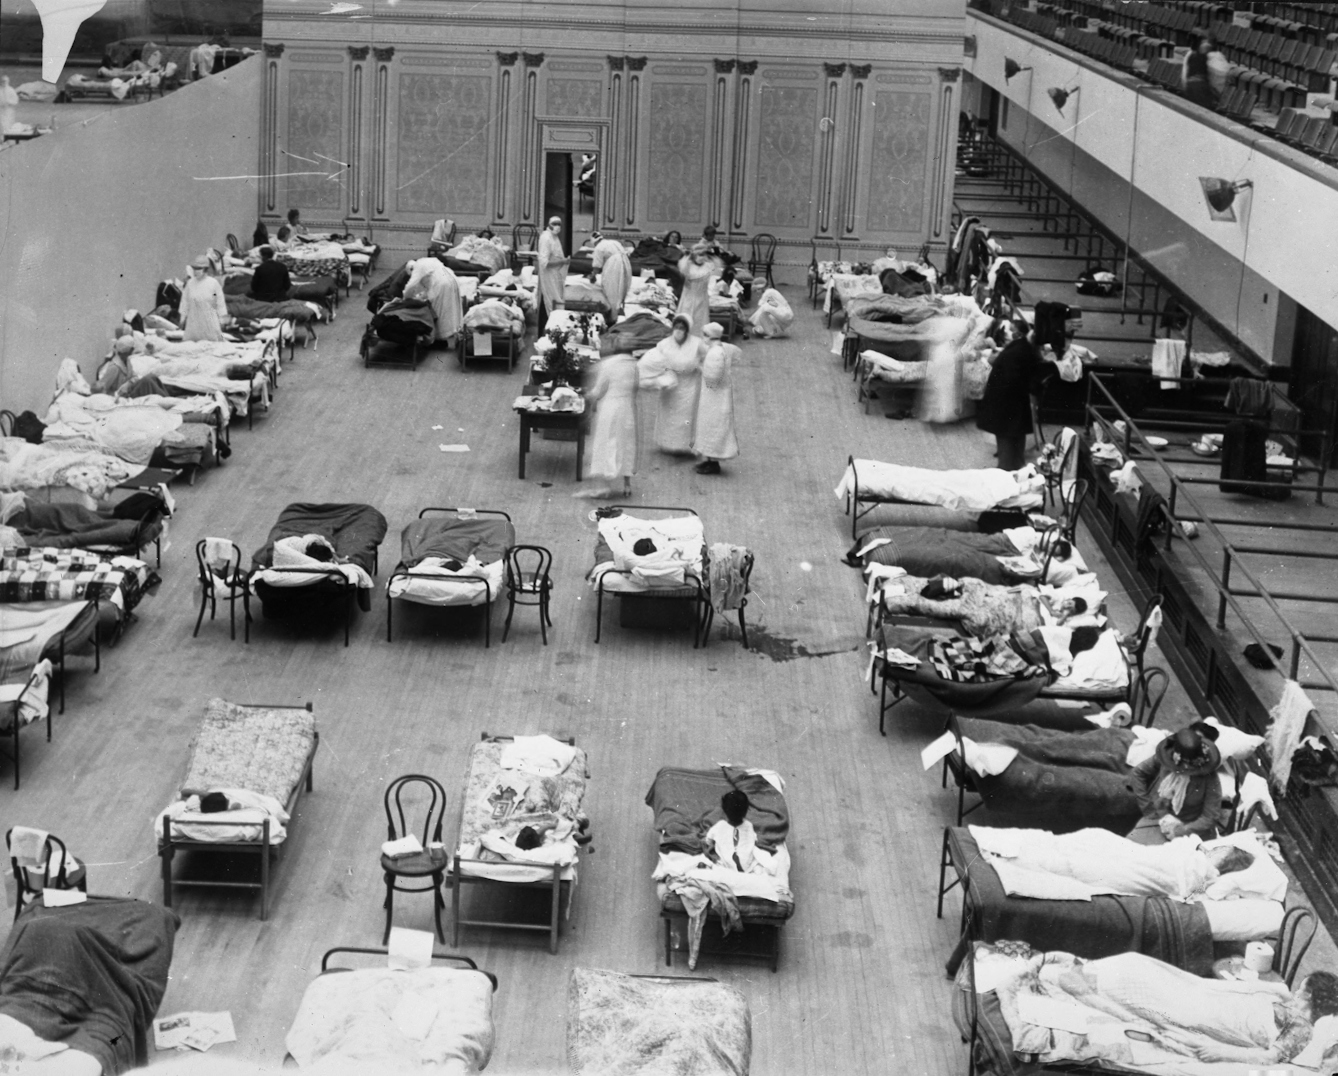 The photograph depicts volunteer nurses from the American Red Cross tending influenza sufferers in the Oakland Auditorium, Oakland, California, during the influenza pandemic of 1918.